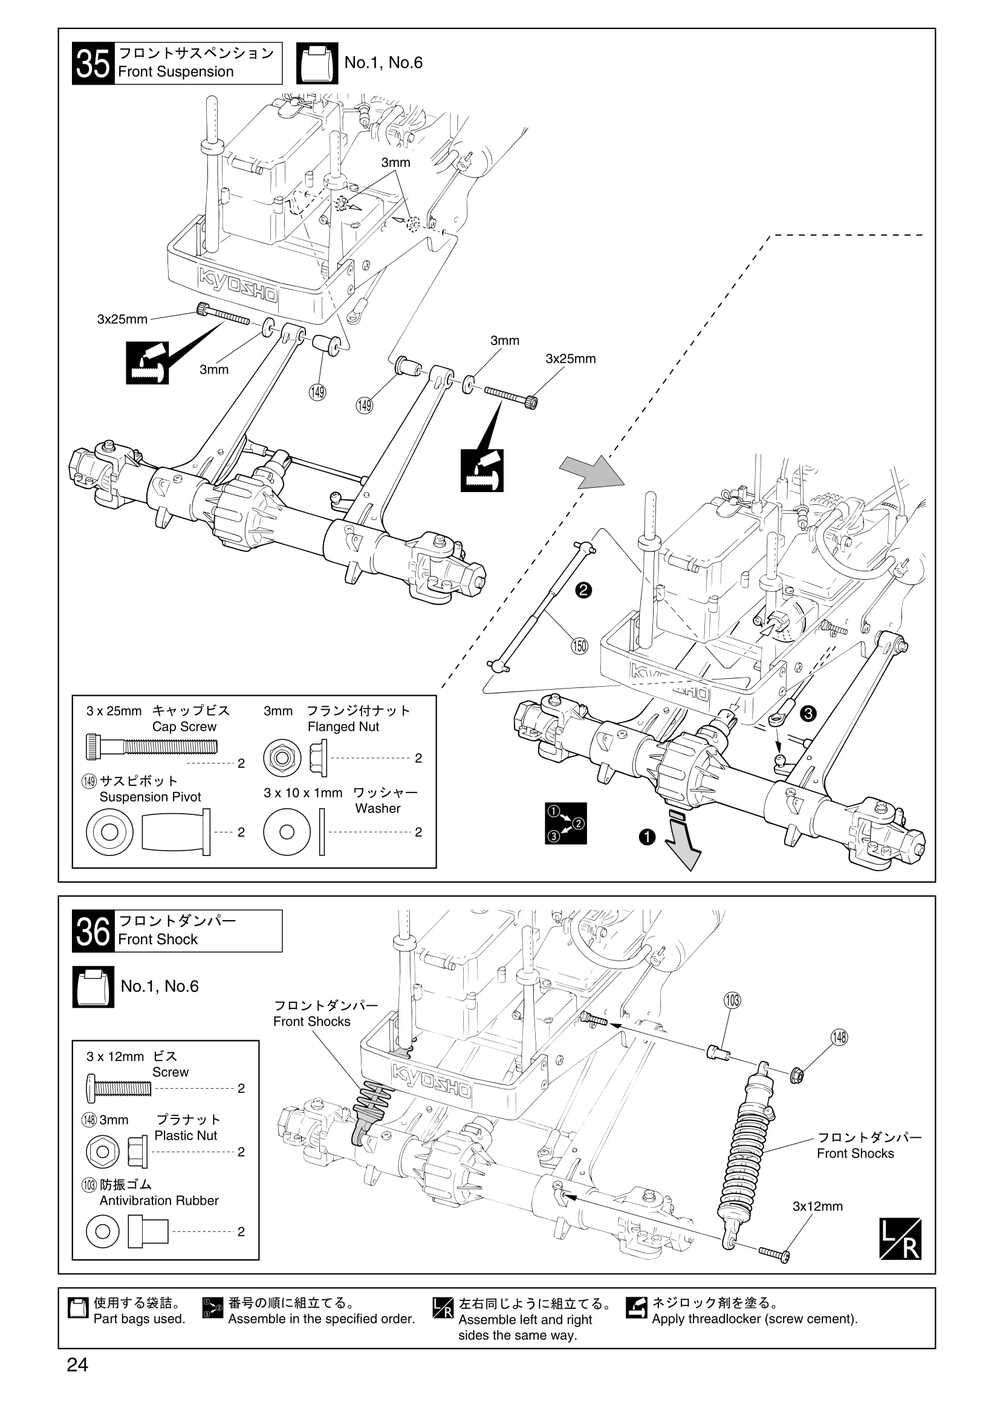 Kyosho - 31221 - Mad-Force - Manual - Page 24